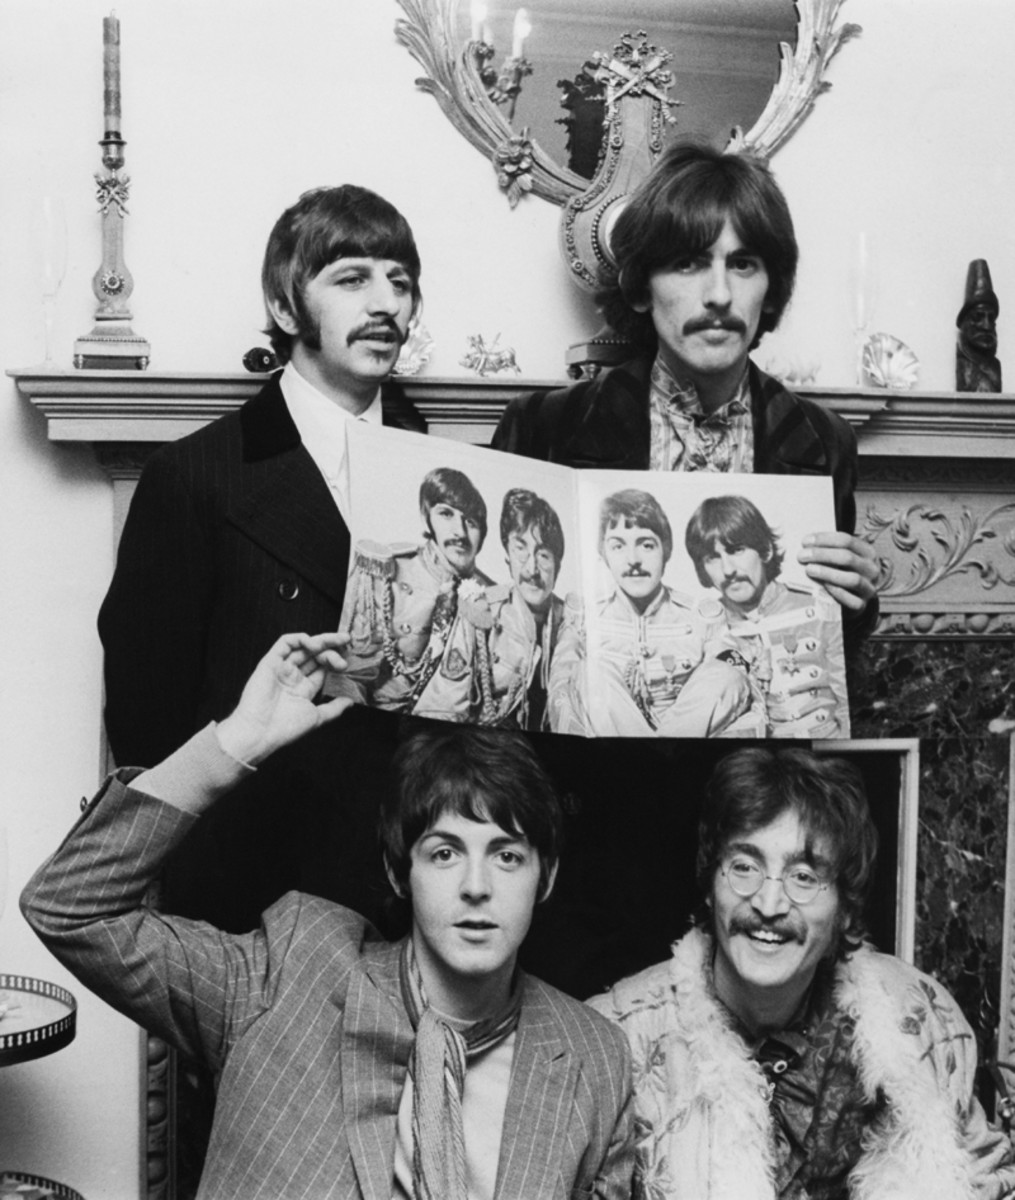  The Beatles during a “Sgt. Pepper” press conference in London on May 20, 1967. (Photo by Keystone-France/Gamma-Keystone via Getty Images)